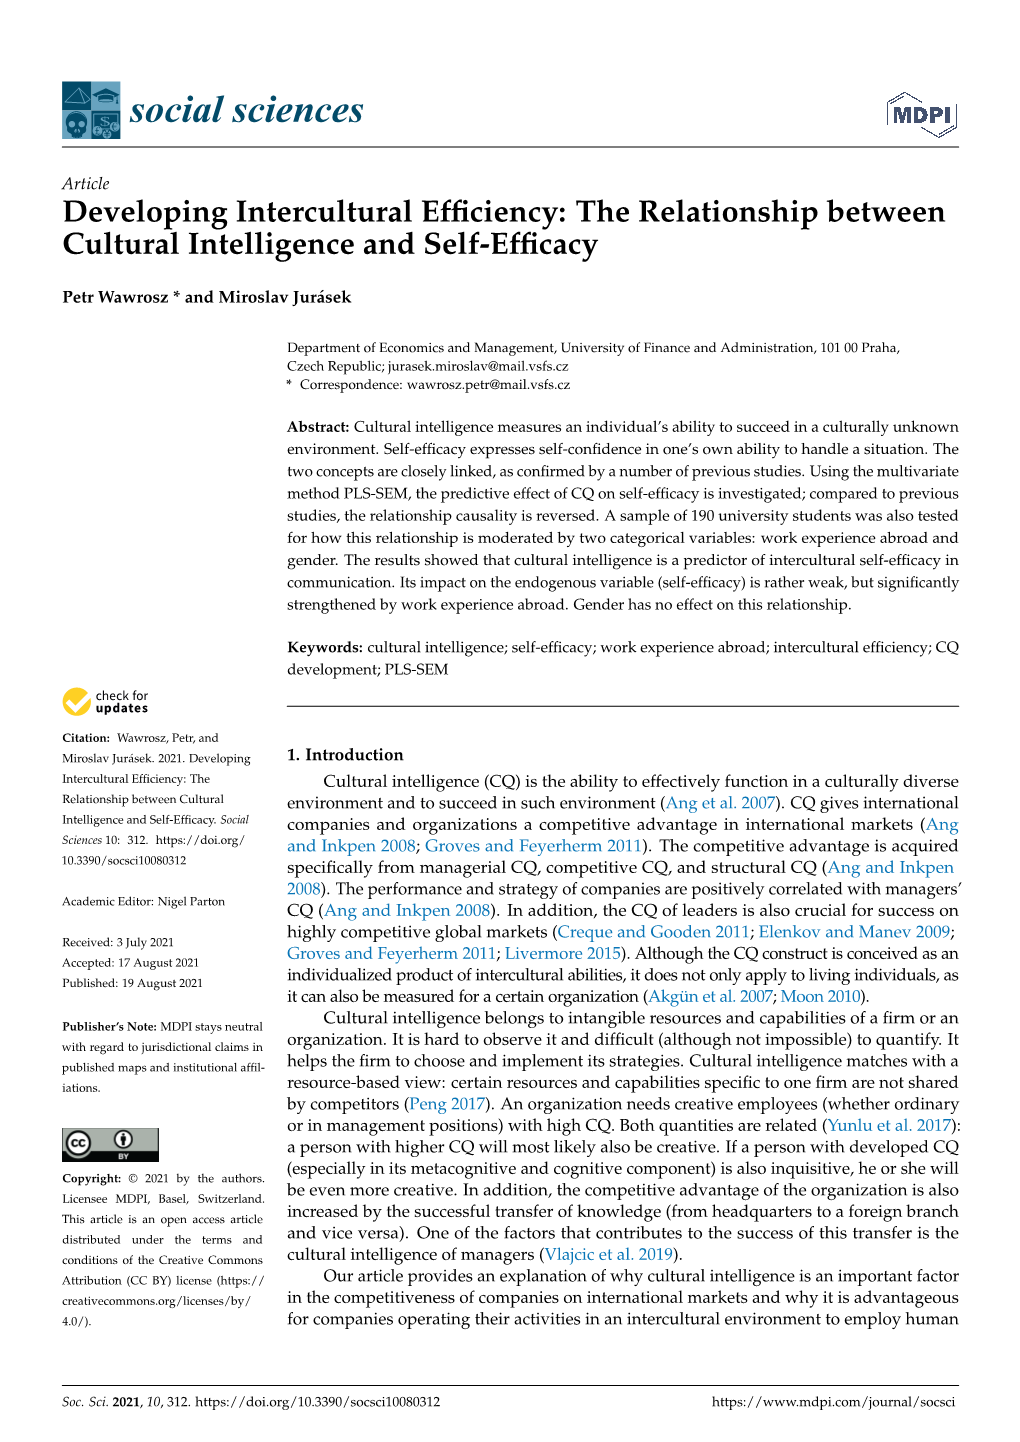 The Relationship Between Cultural Intelligence and Self-Efficacy